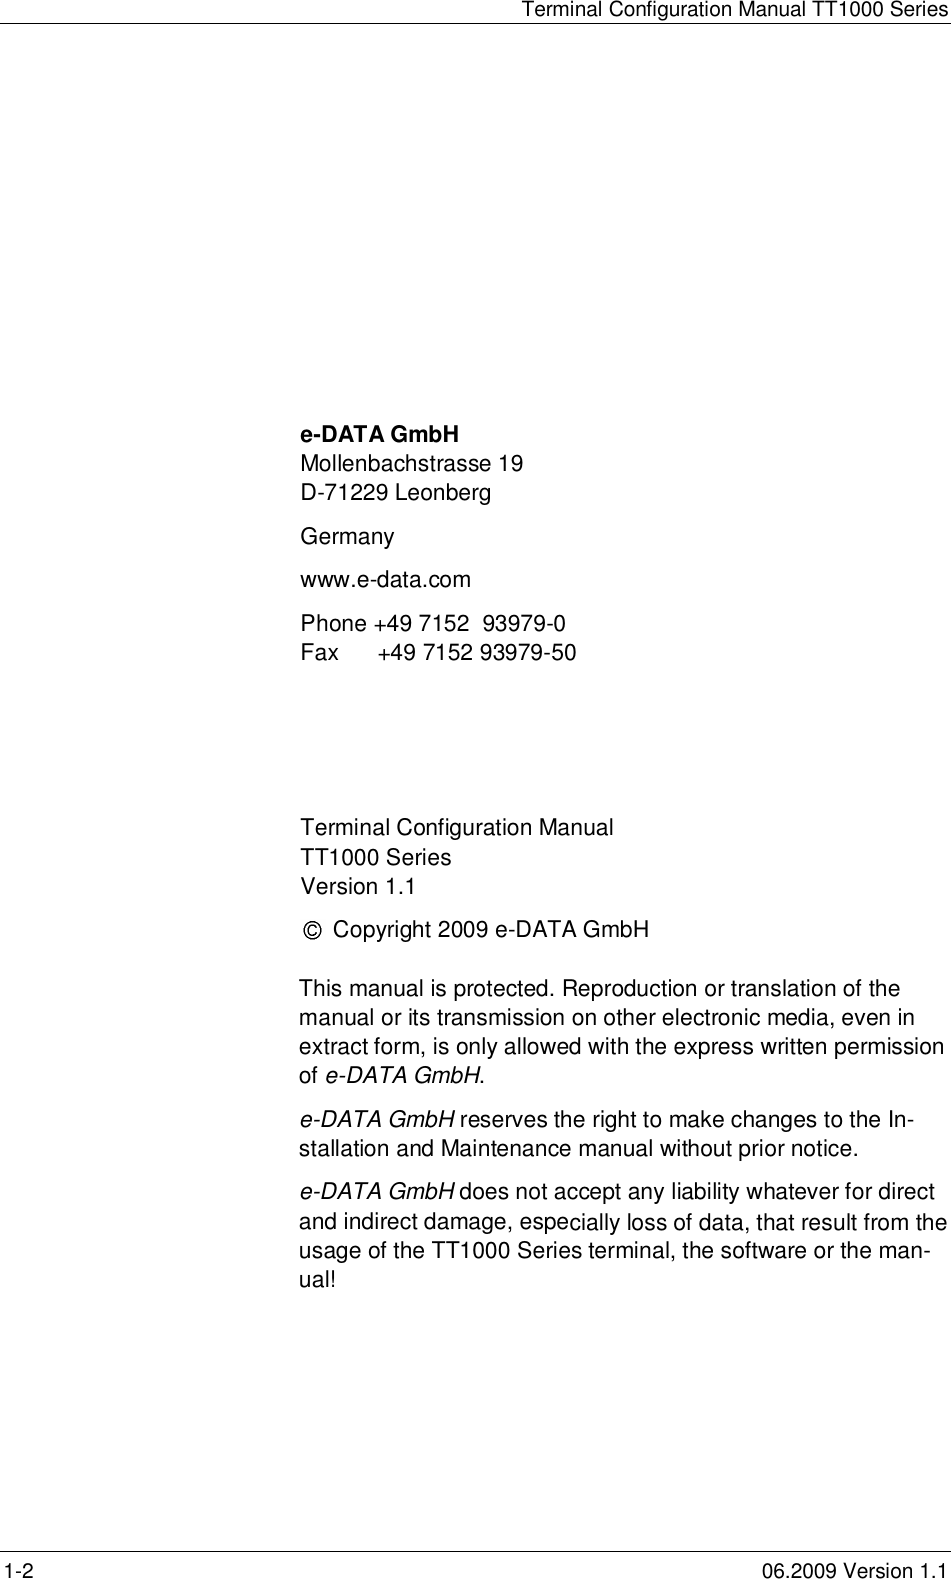 Terminal Configuration Manual TT1000 Series1-2 06.2009 Version 1.1e-DATA GmbHMollenbachstrasse 19D-71229 LeonbergGermanywww.e-data.comPhone +49 7152  93979-0Fax      +49 7152 93979-50Terminal Configuration ManualTT1000 SeriesVersion 1.1Copyright 2009 e-DATA GmbHThis manual is protected. Reproduction or translation of themanual or its transmission on other electronic media, even inextract form, is only allowed with the express written permissionof e-DATA GmbH.e-DATA GmbH reserves the right to make changes to the In-stallation and Maintenance manual without prior notice.e-DATA GmbH does not accept any liability whatever for directand indirect damage, especially loss of data, that result from theusage of the TT1000 Series terminal, the software or the man-ual!